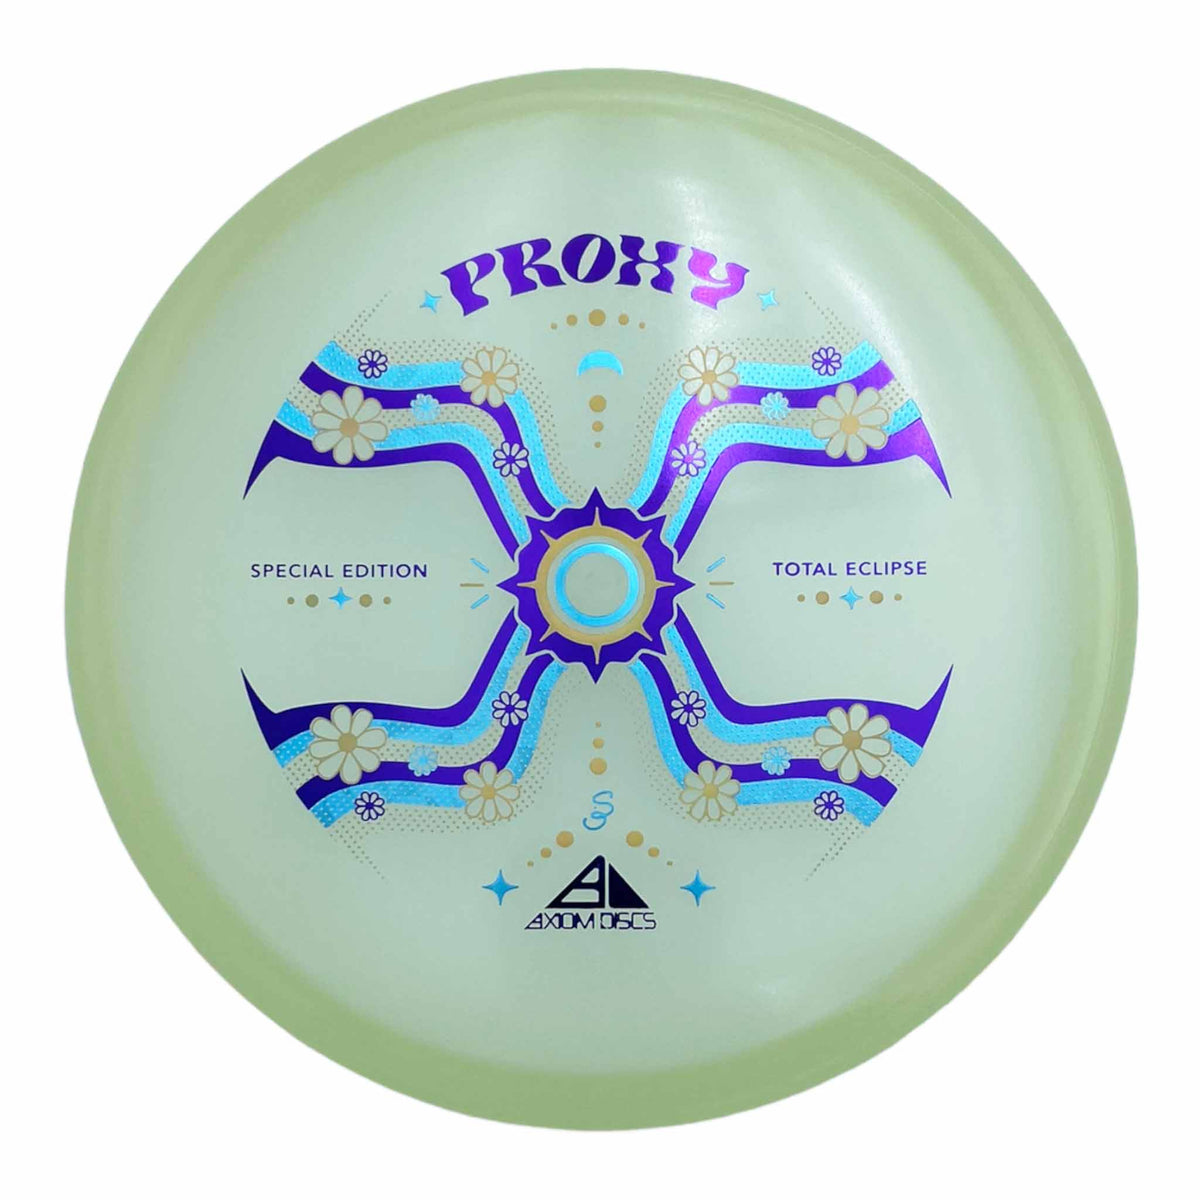 Axiom Discs Total Eclipse Glow Proxy putter and approach